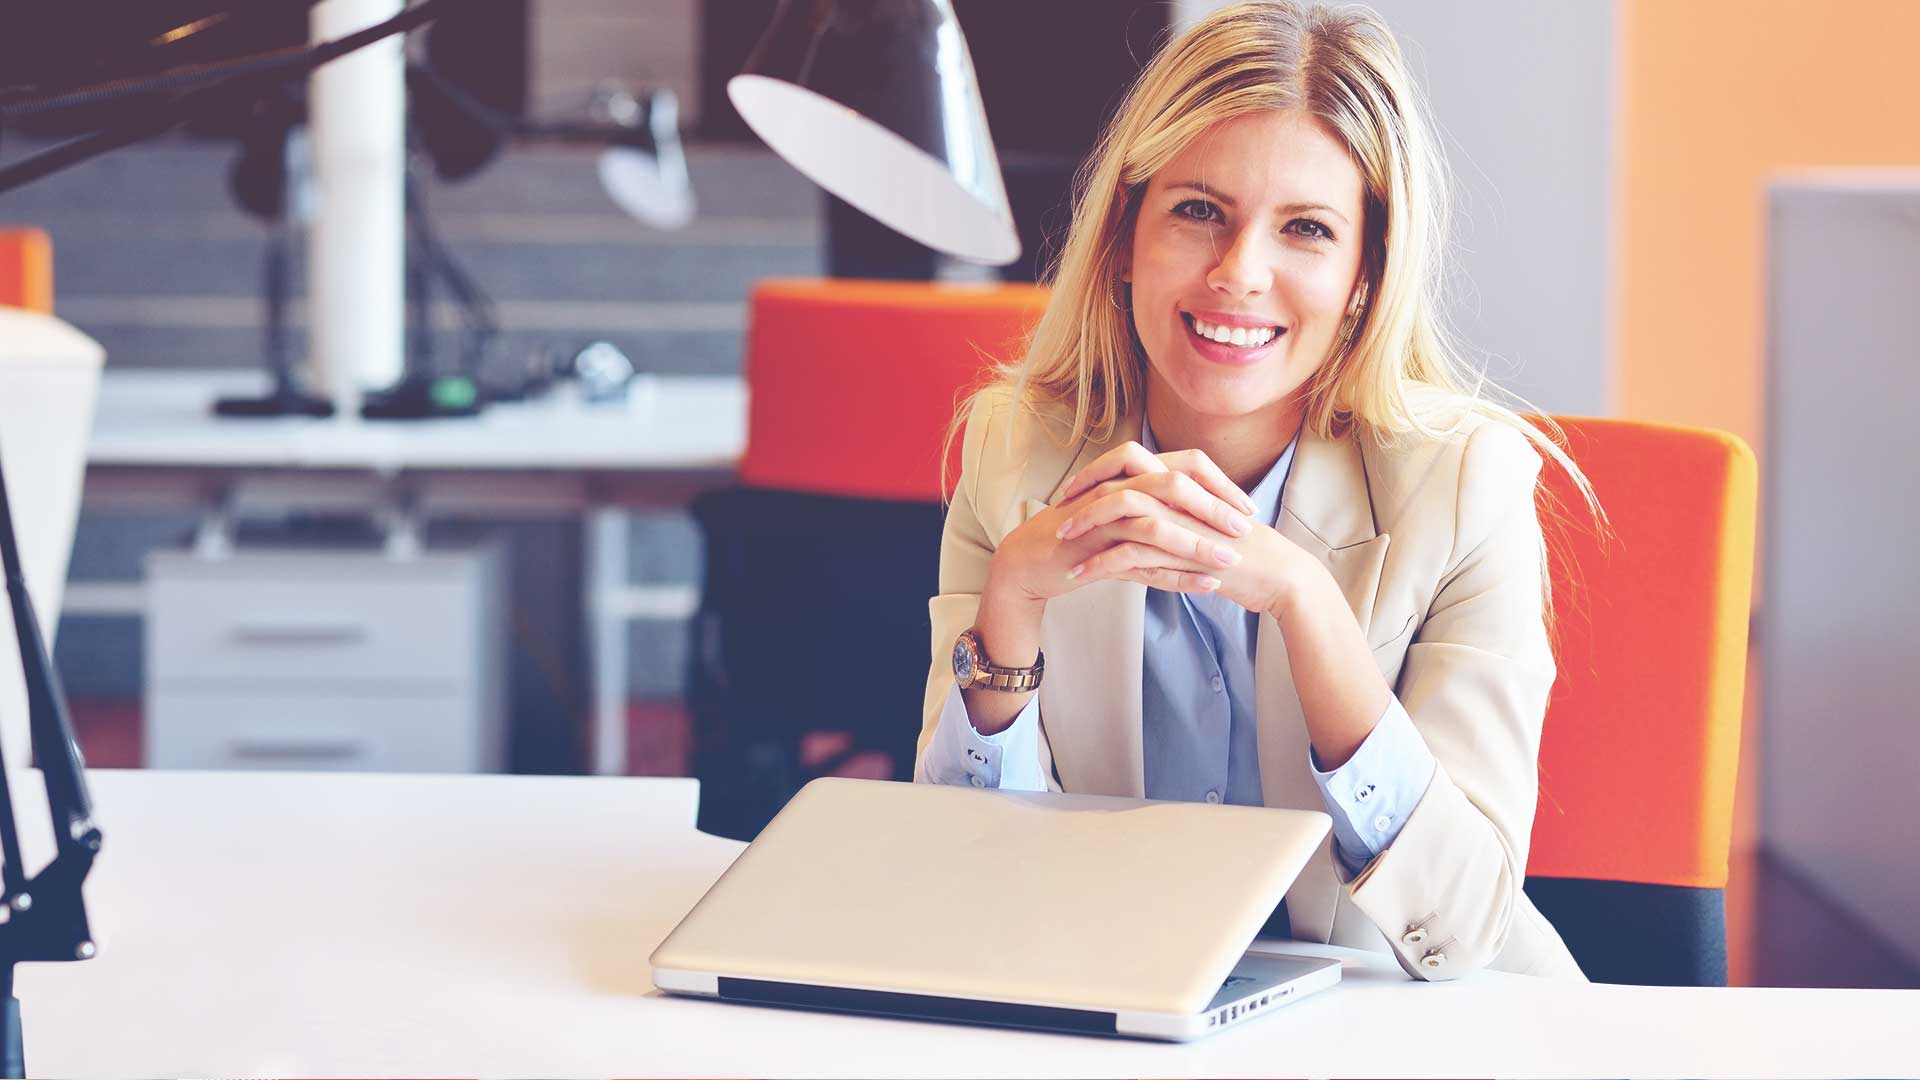 smiling professional woman at desk with closed laptop